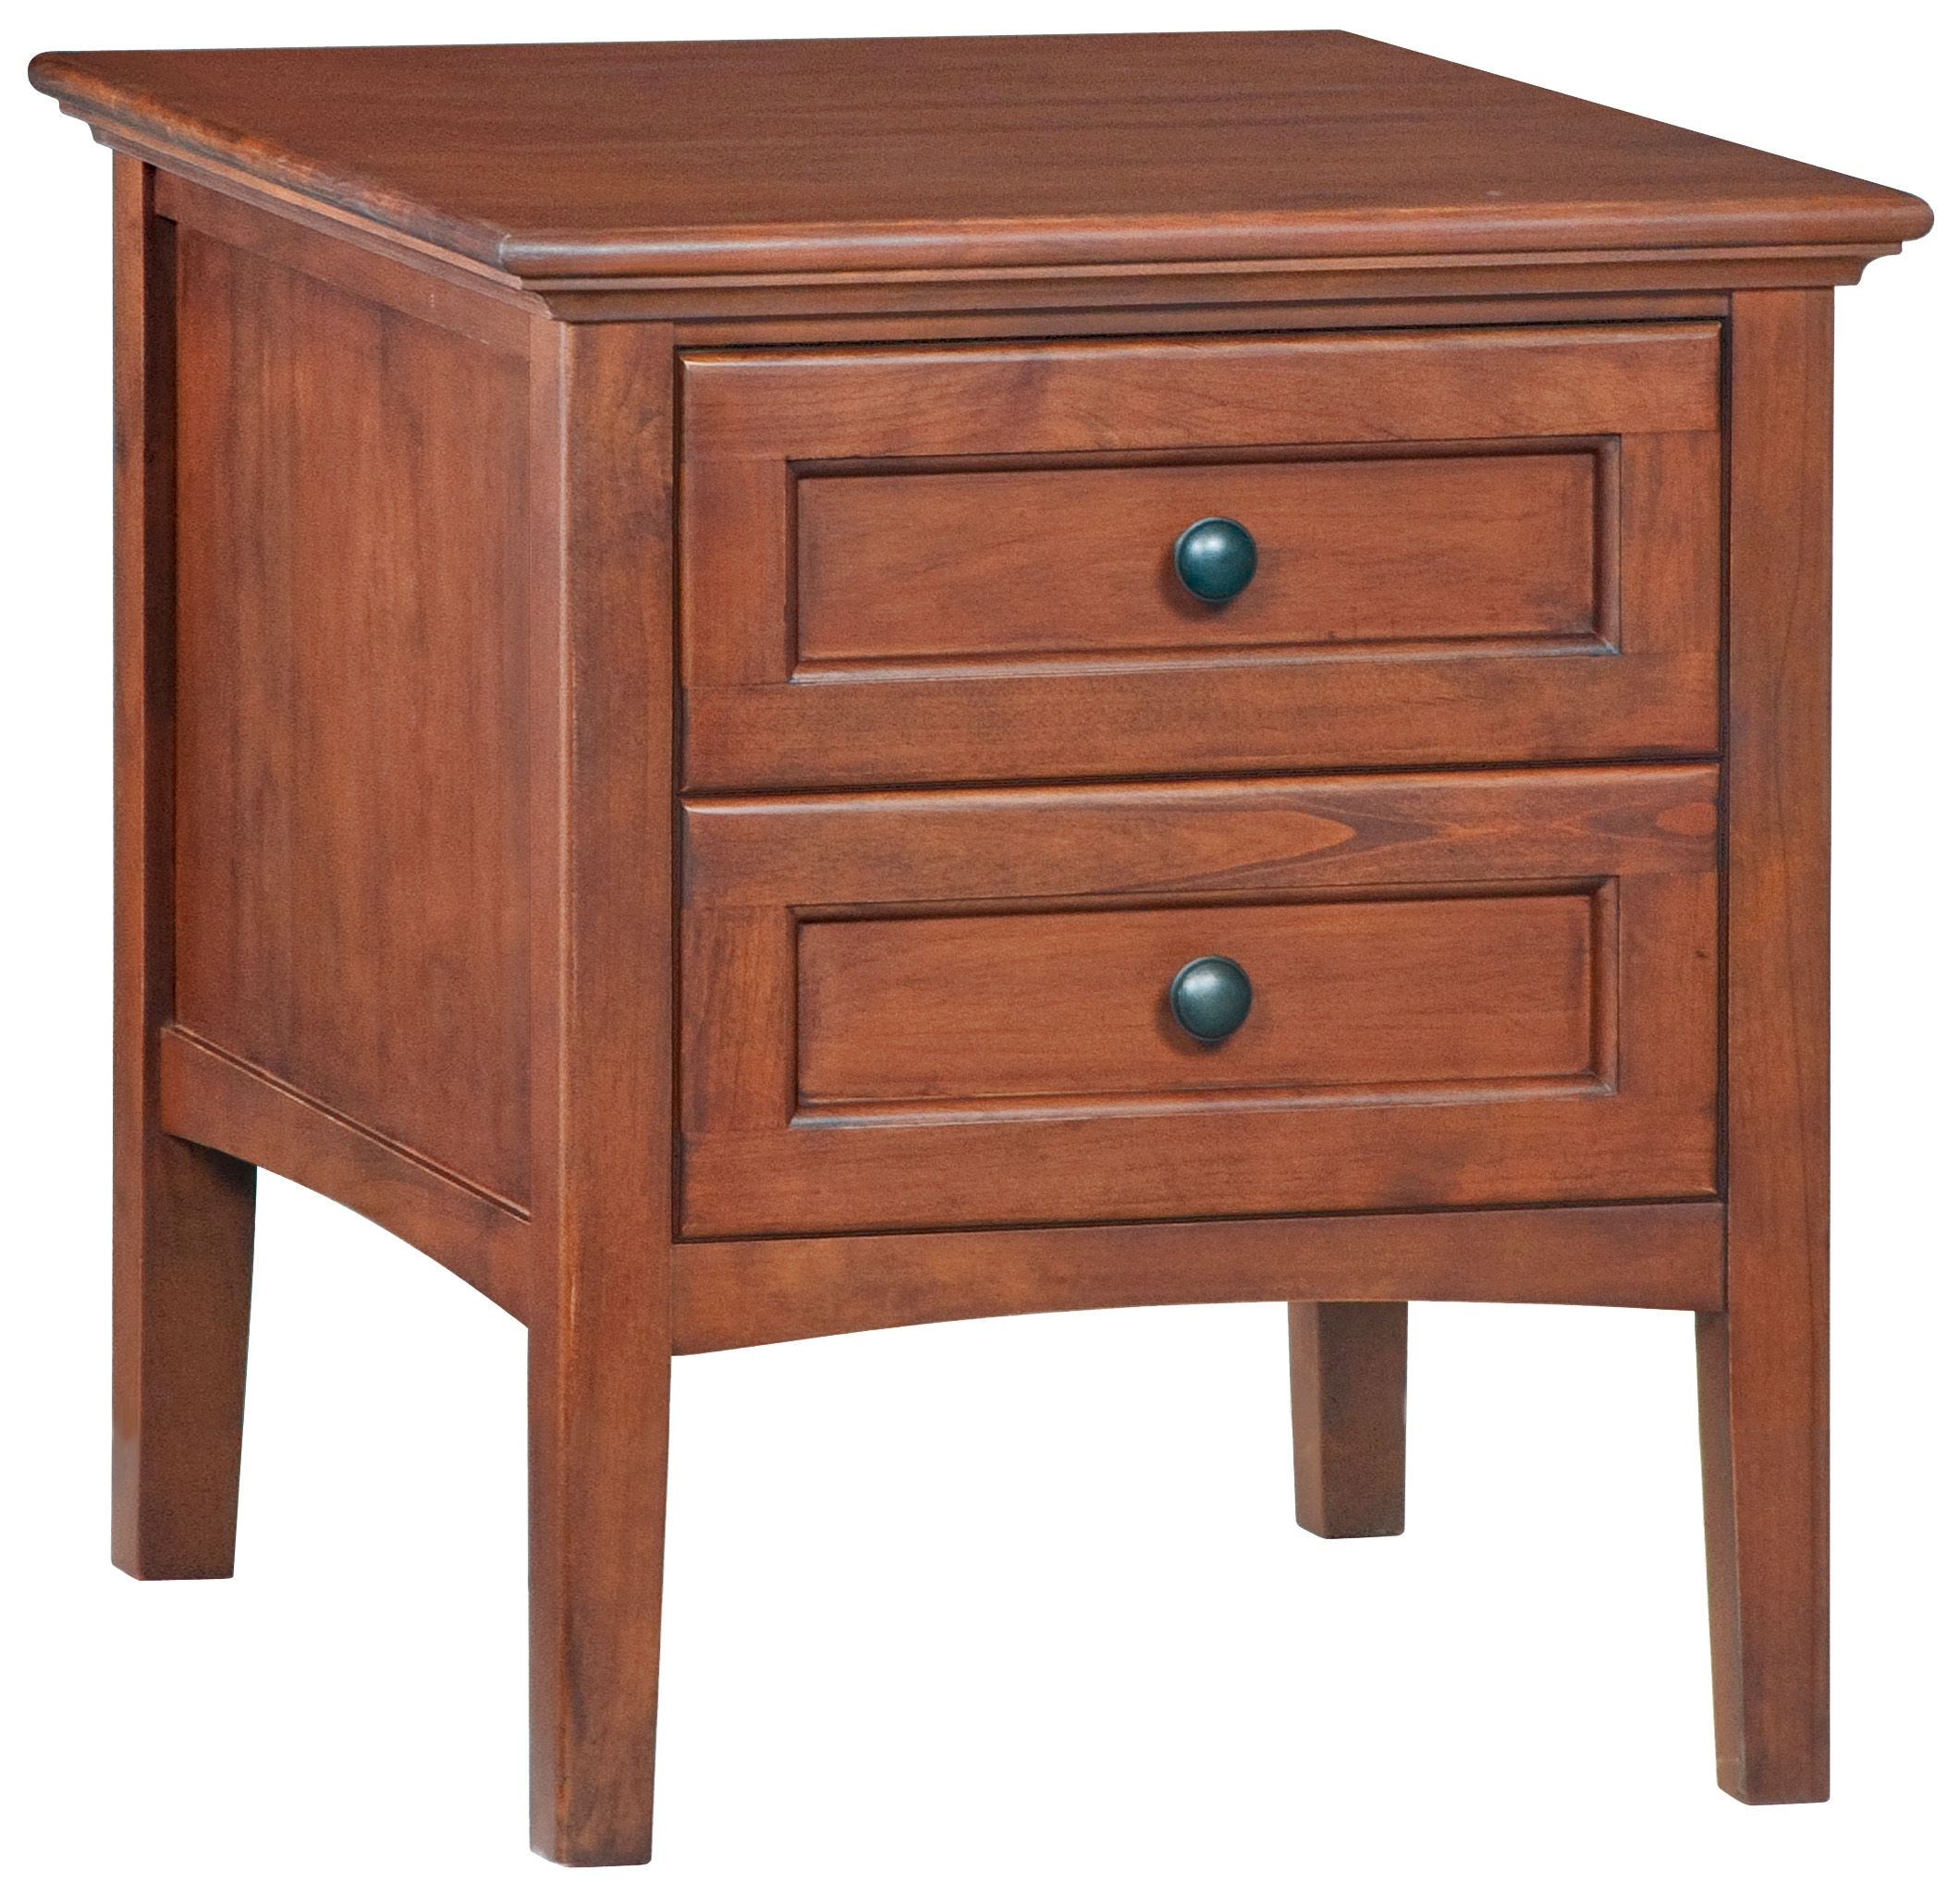 Whittier Wood Products Living Room GAC McKenzie End Table 3501GAC 